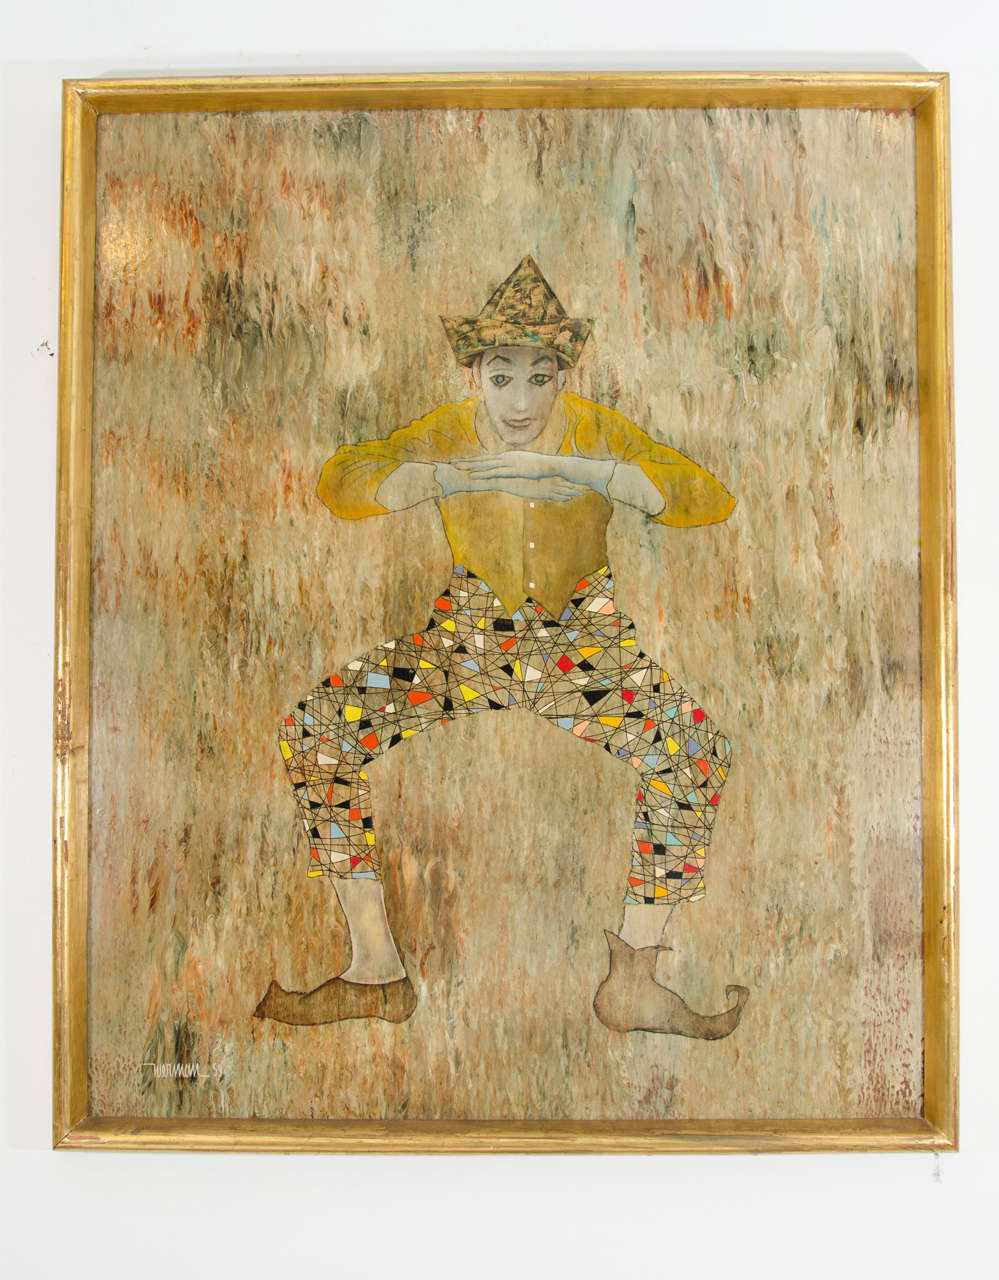 A vintage large mixed media painting of an expressionistic, colorful clown or harlequin on masonite, by Mexican artist Leonardo Nierman (1932-), circa 1950s. Markings include the artist's signature and date [1959] on the lower left. Good vintage